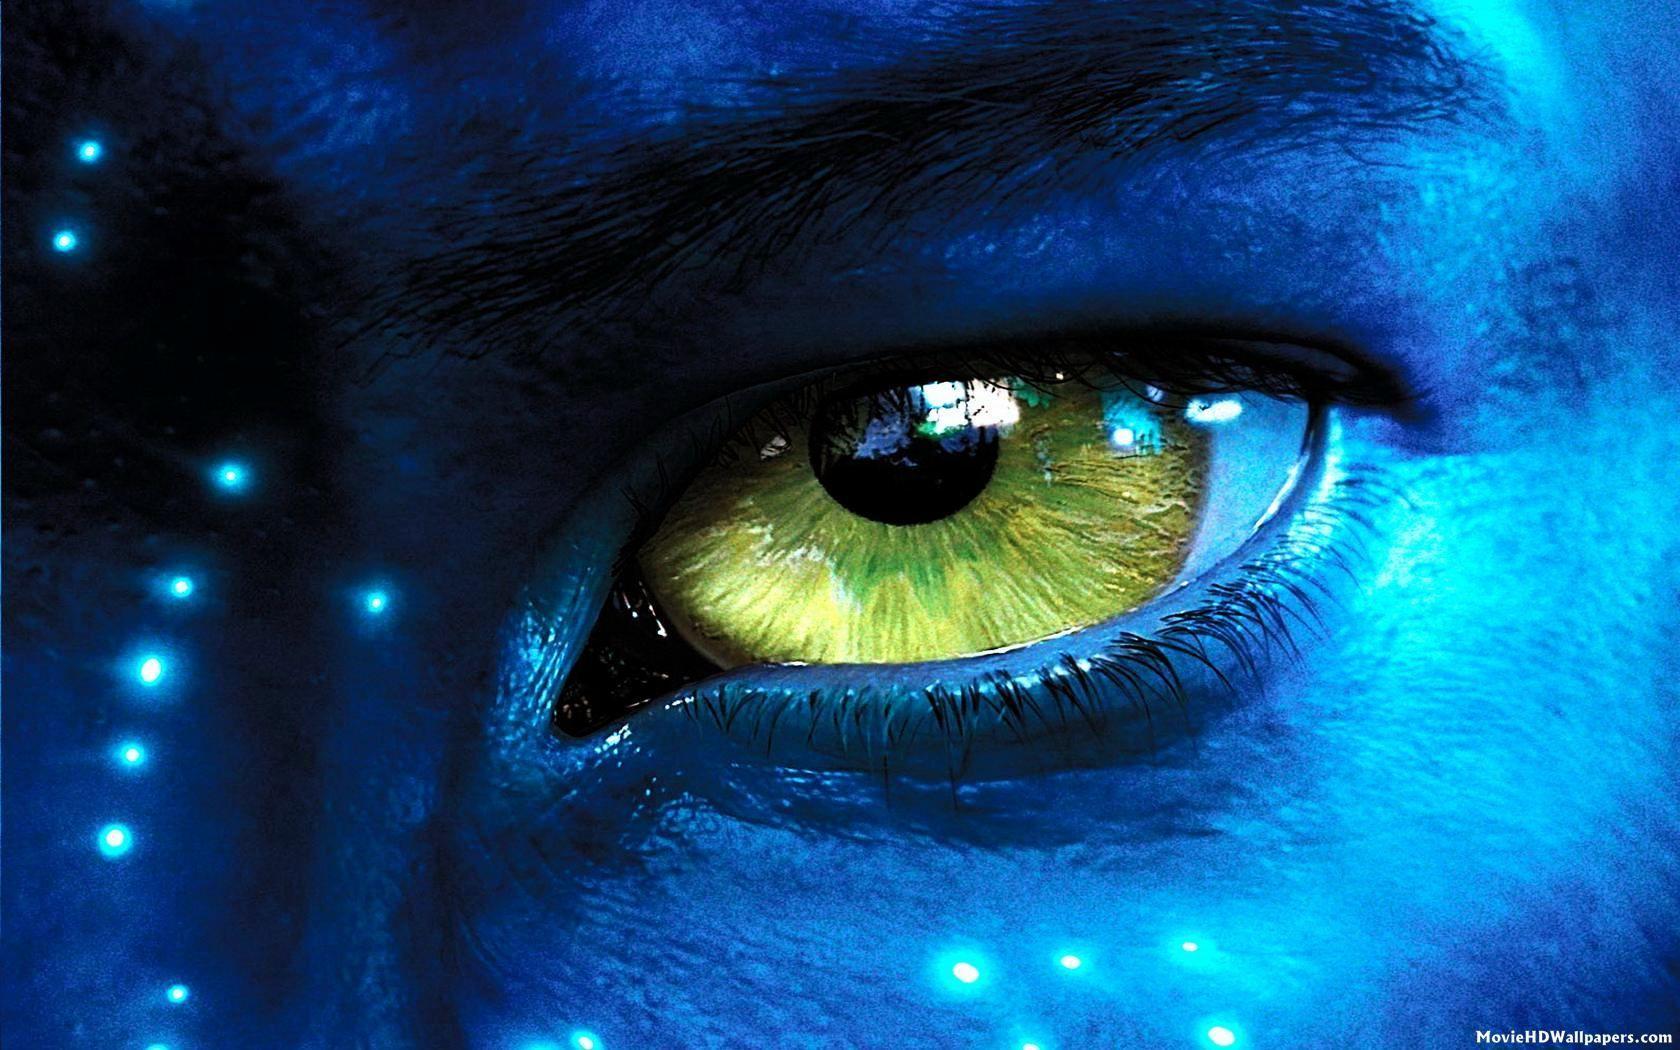 Avatar 2 The Way of Water Movie Wallpapers for Desktop  DoubleMesh   Business and Technology